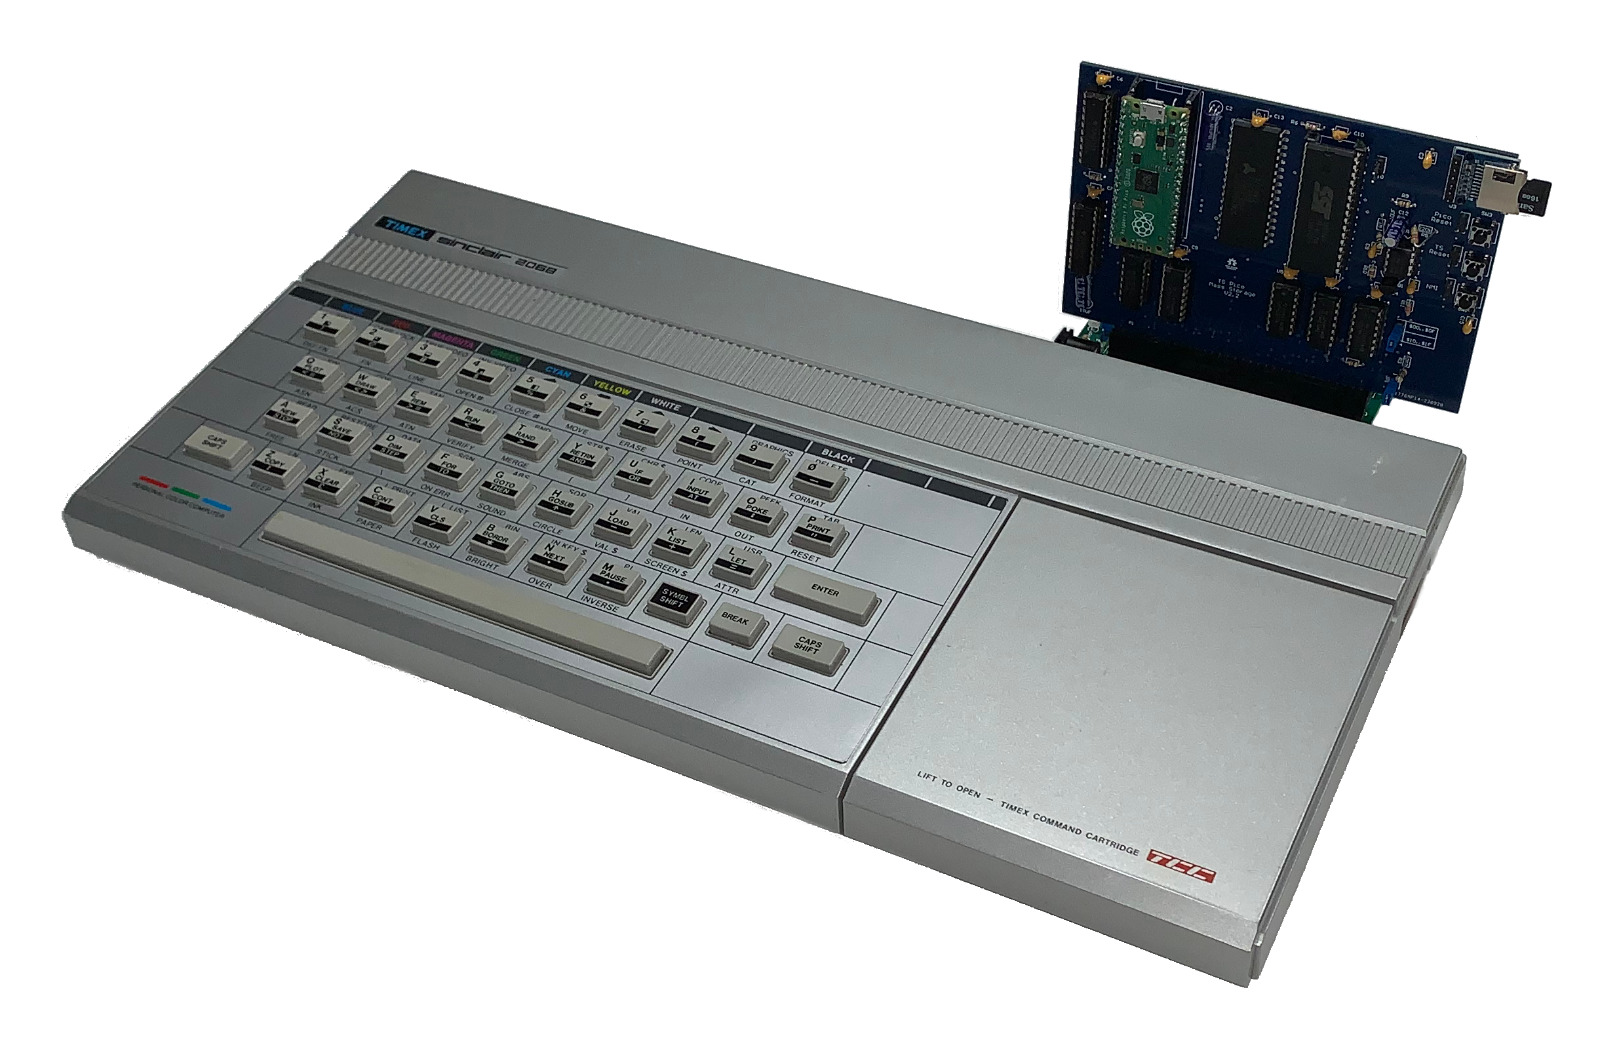 Timex Sinclair 2068 SD card storage and improved video system